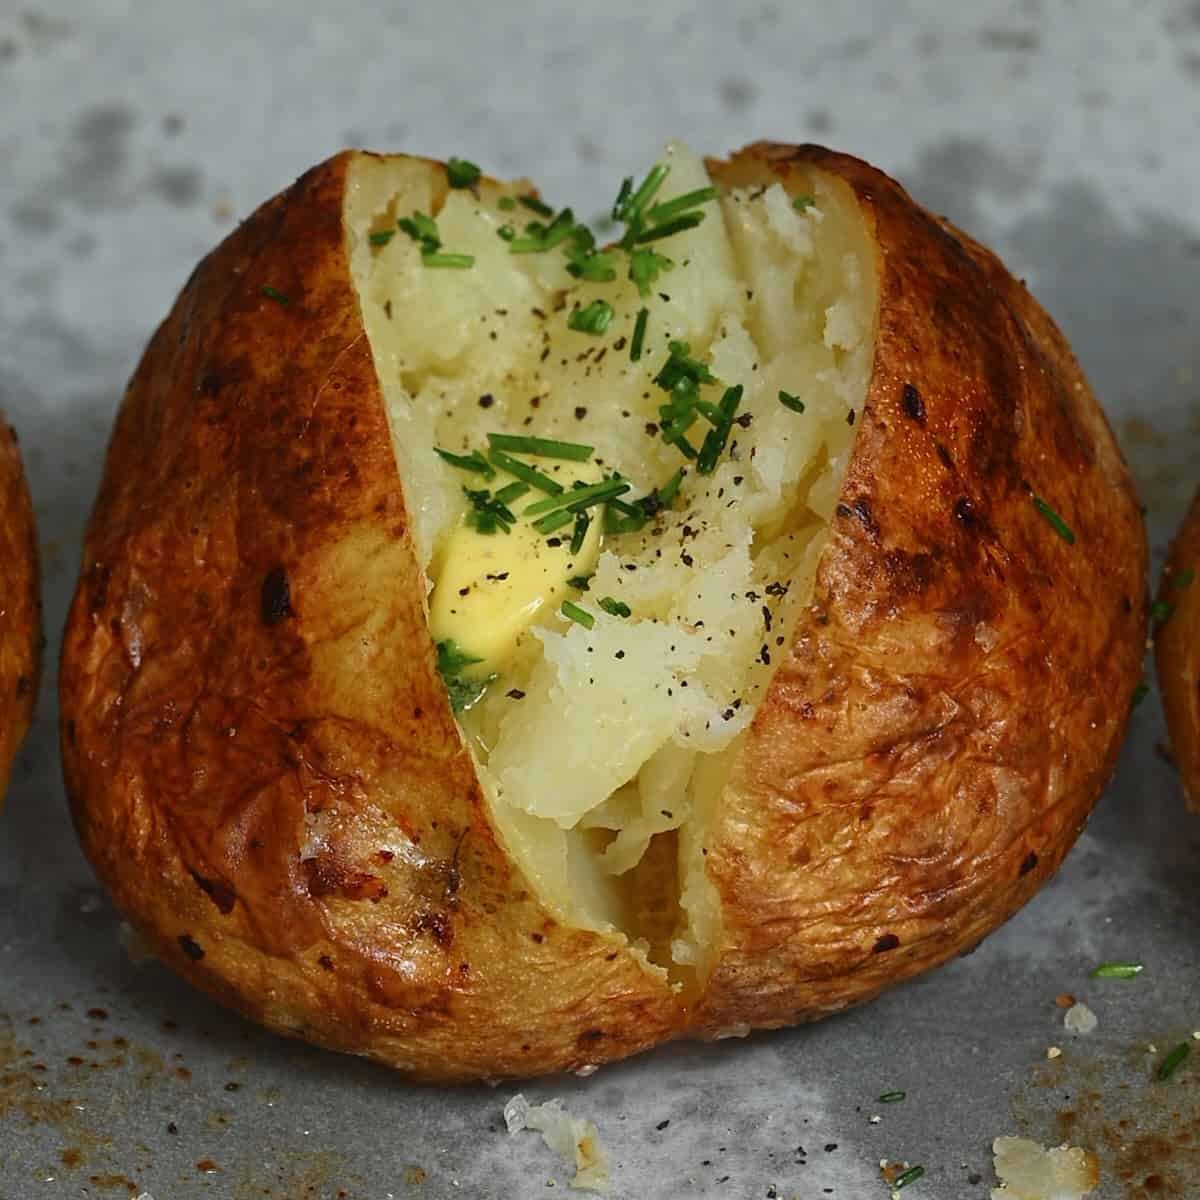 https://www.alphafoodie.com/wp-content/uploads/2022/09/Oven-Baked-Potatoes-square.jpeg